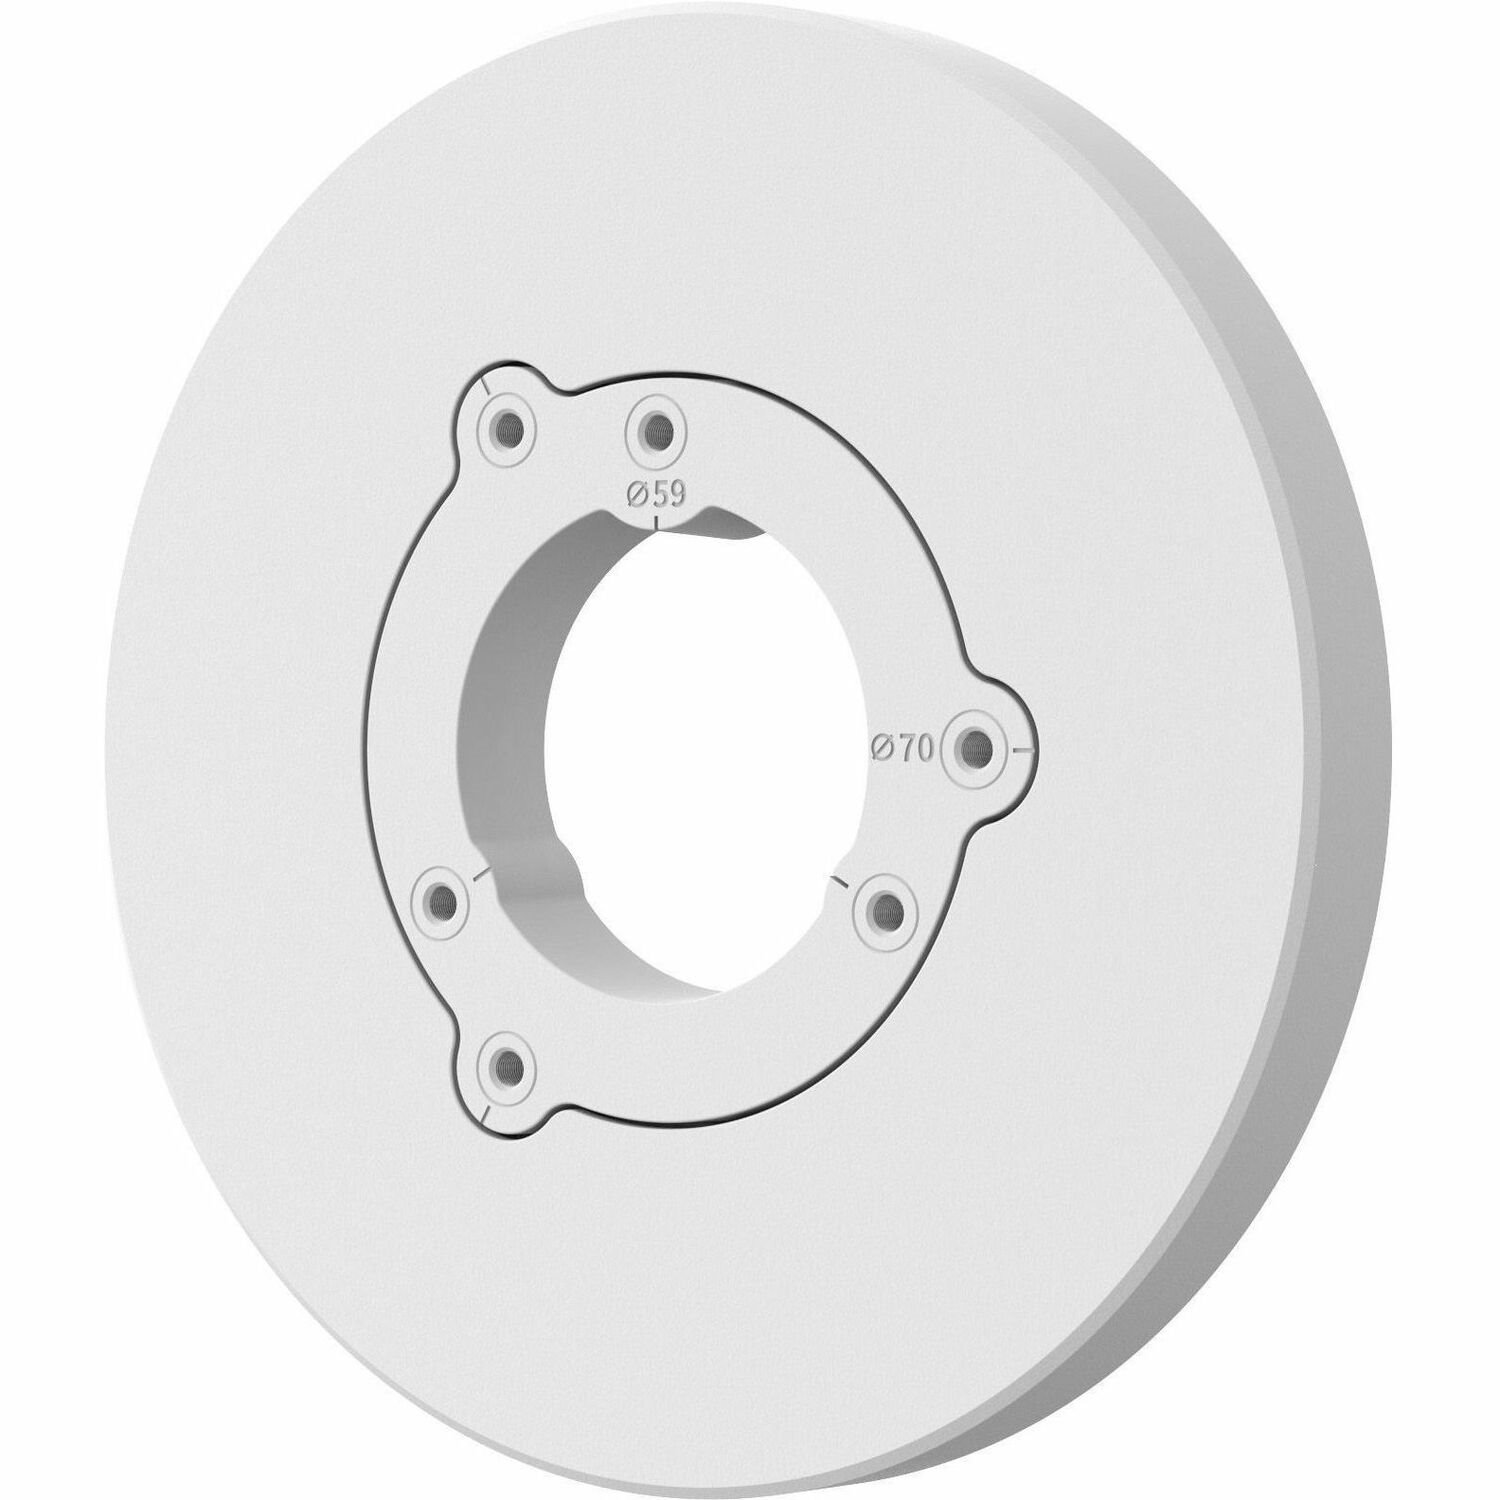 Hanwha Mounting Adapter for Camera - White